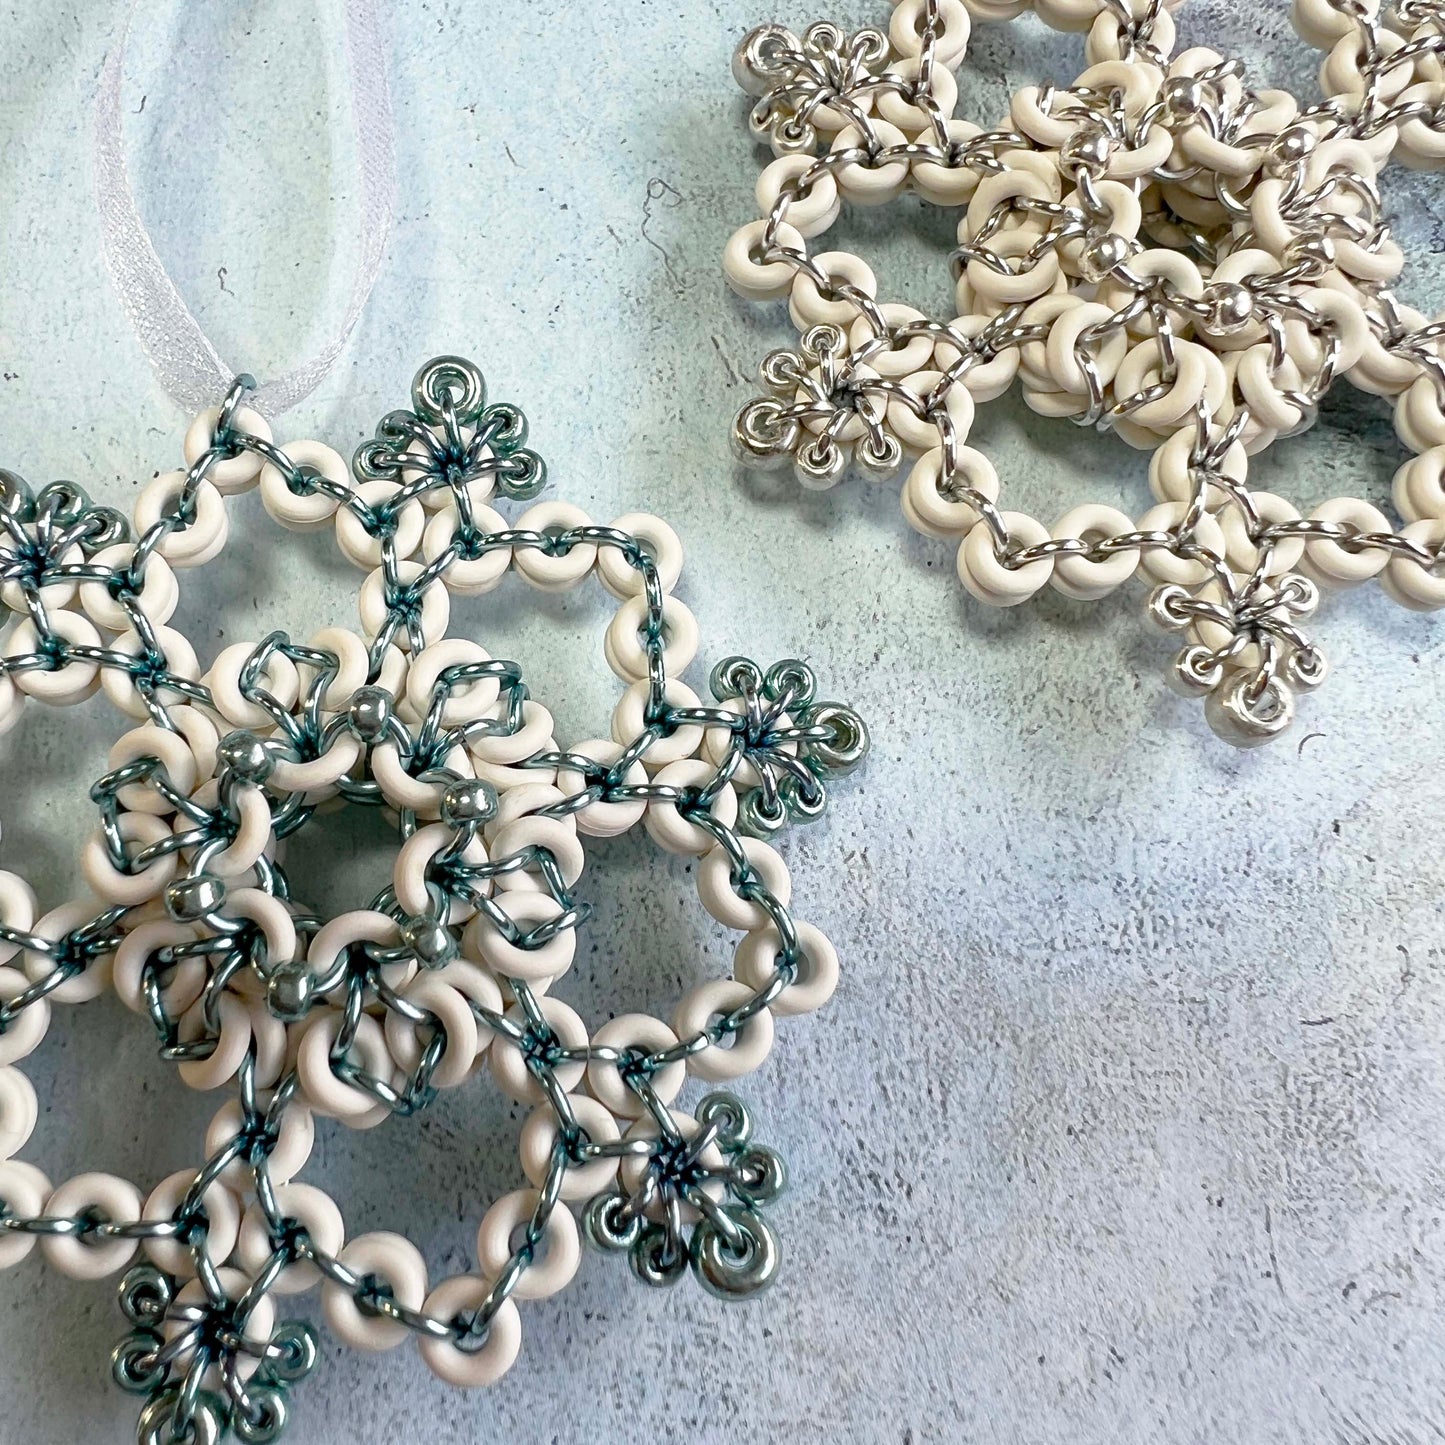 Beaded Lentil Snowflake Ornament White & Sterling Silver Refill - materials only (no instructions included)